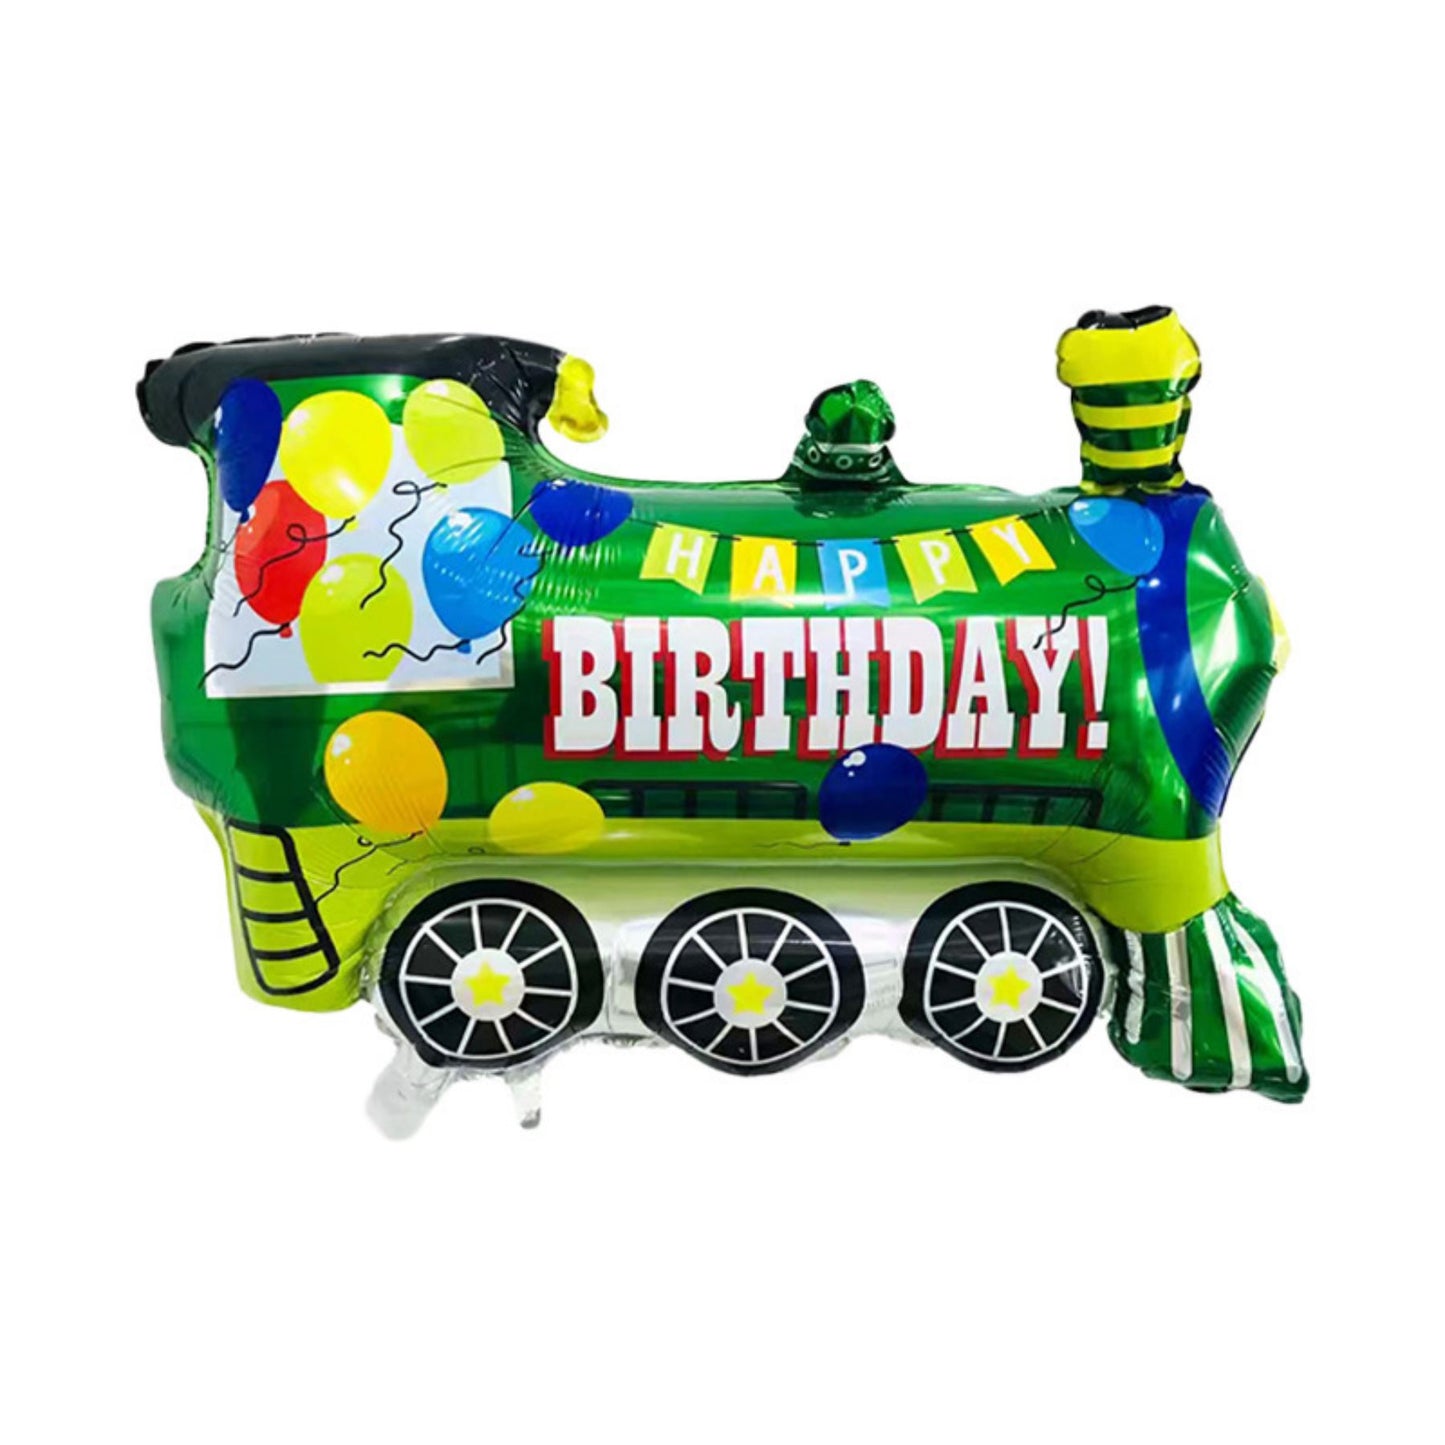 Tractor vehicle farm theme birthday party one year old balloon decoration set